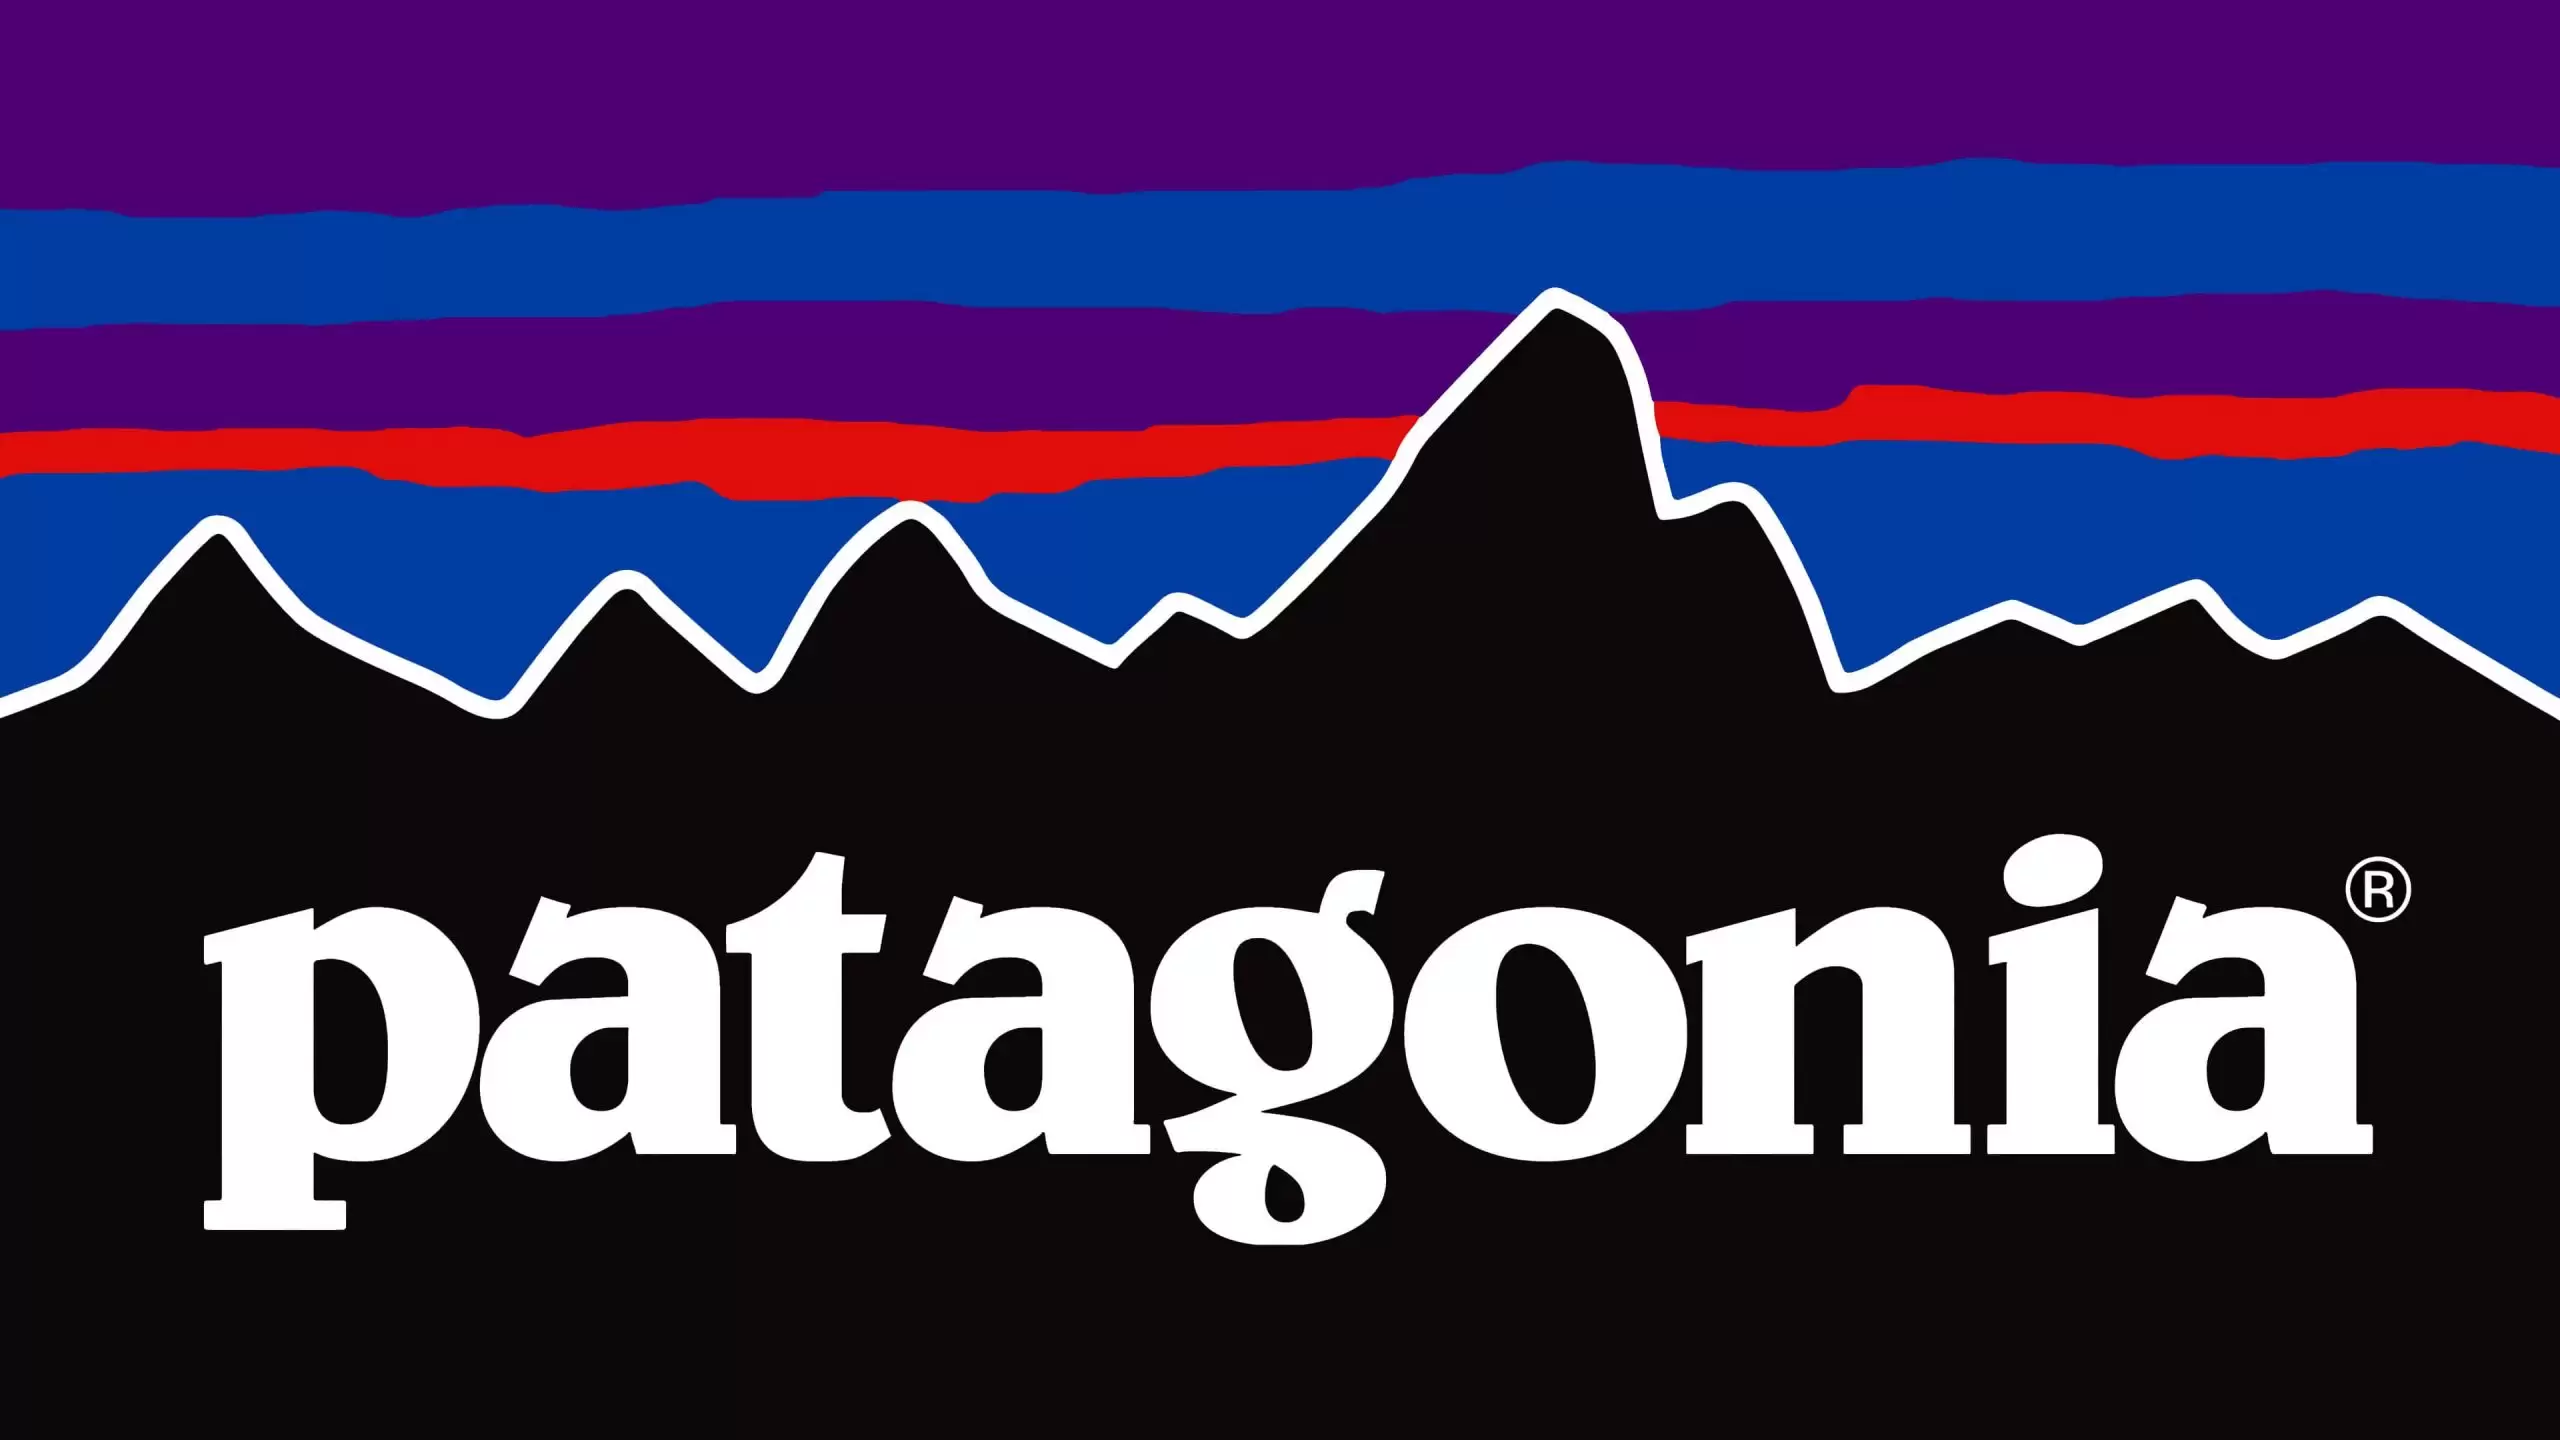 Patagonia – The Story behind the Brand